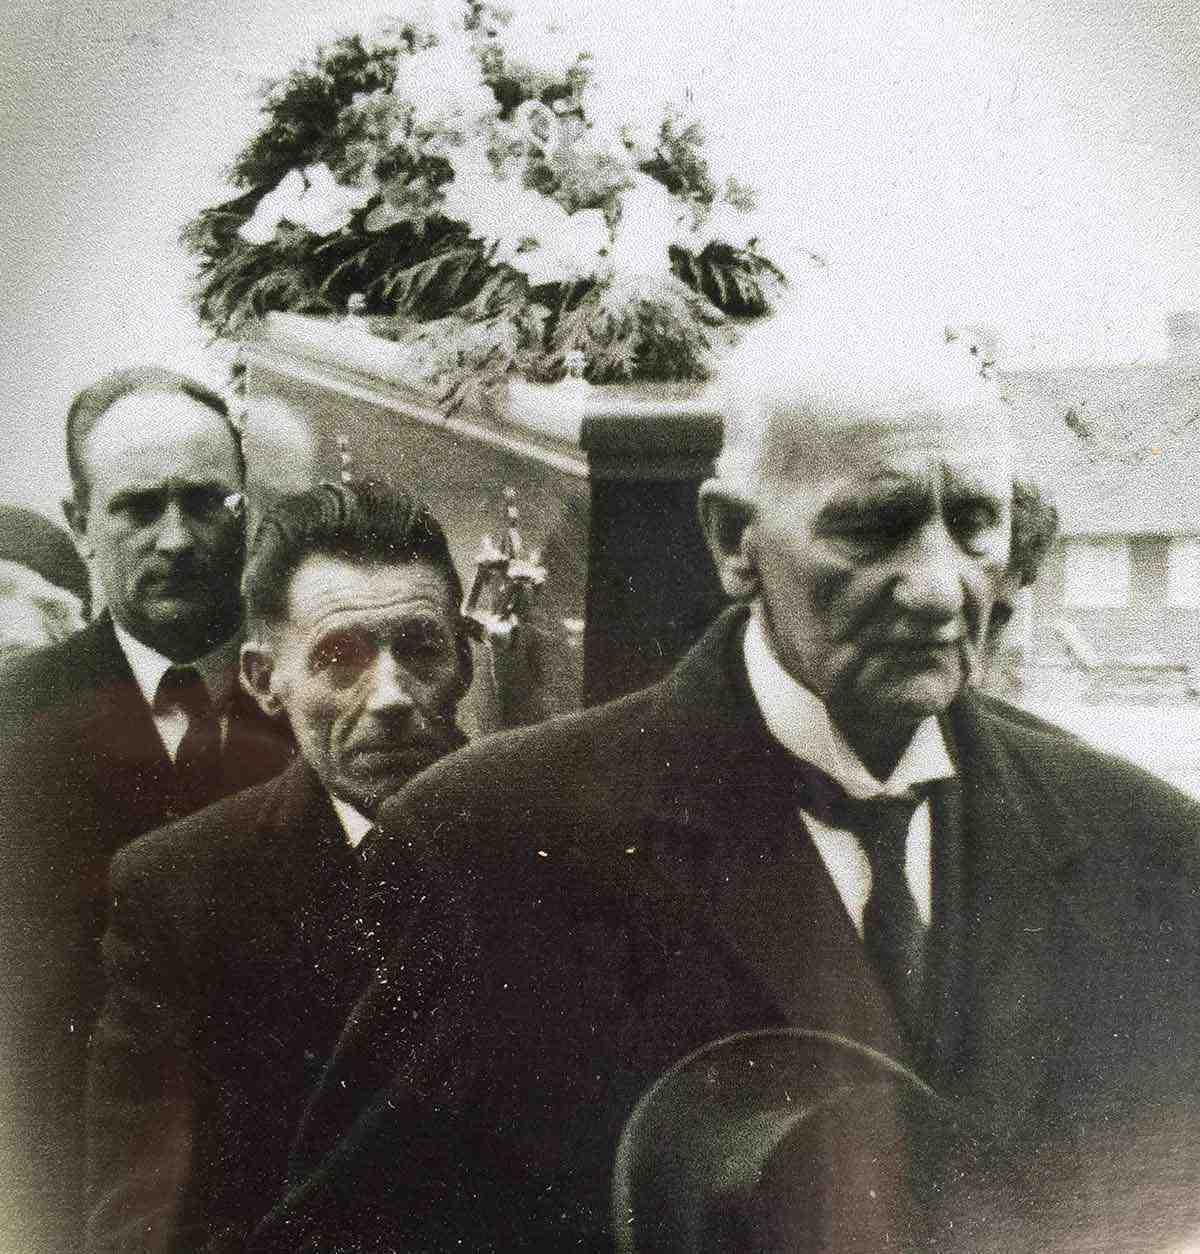 A photograph of three men carrying a coffin